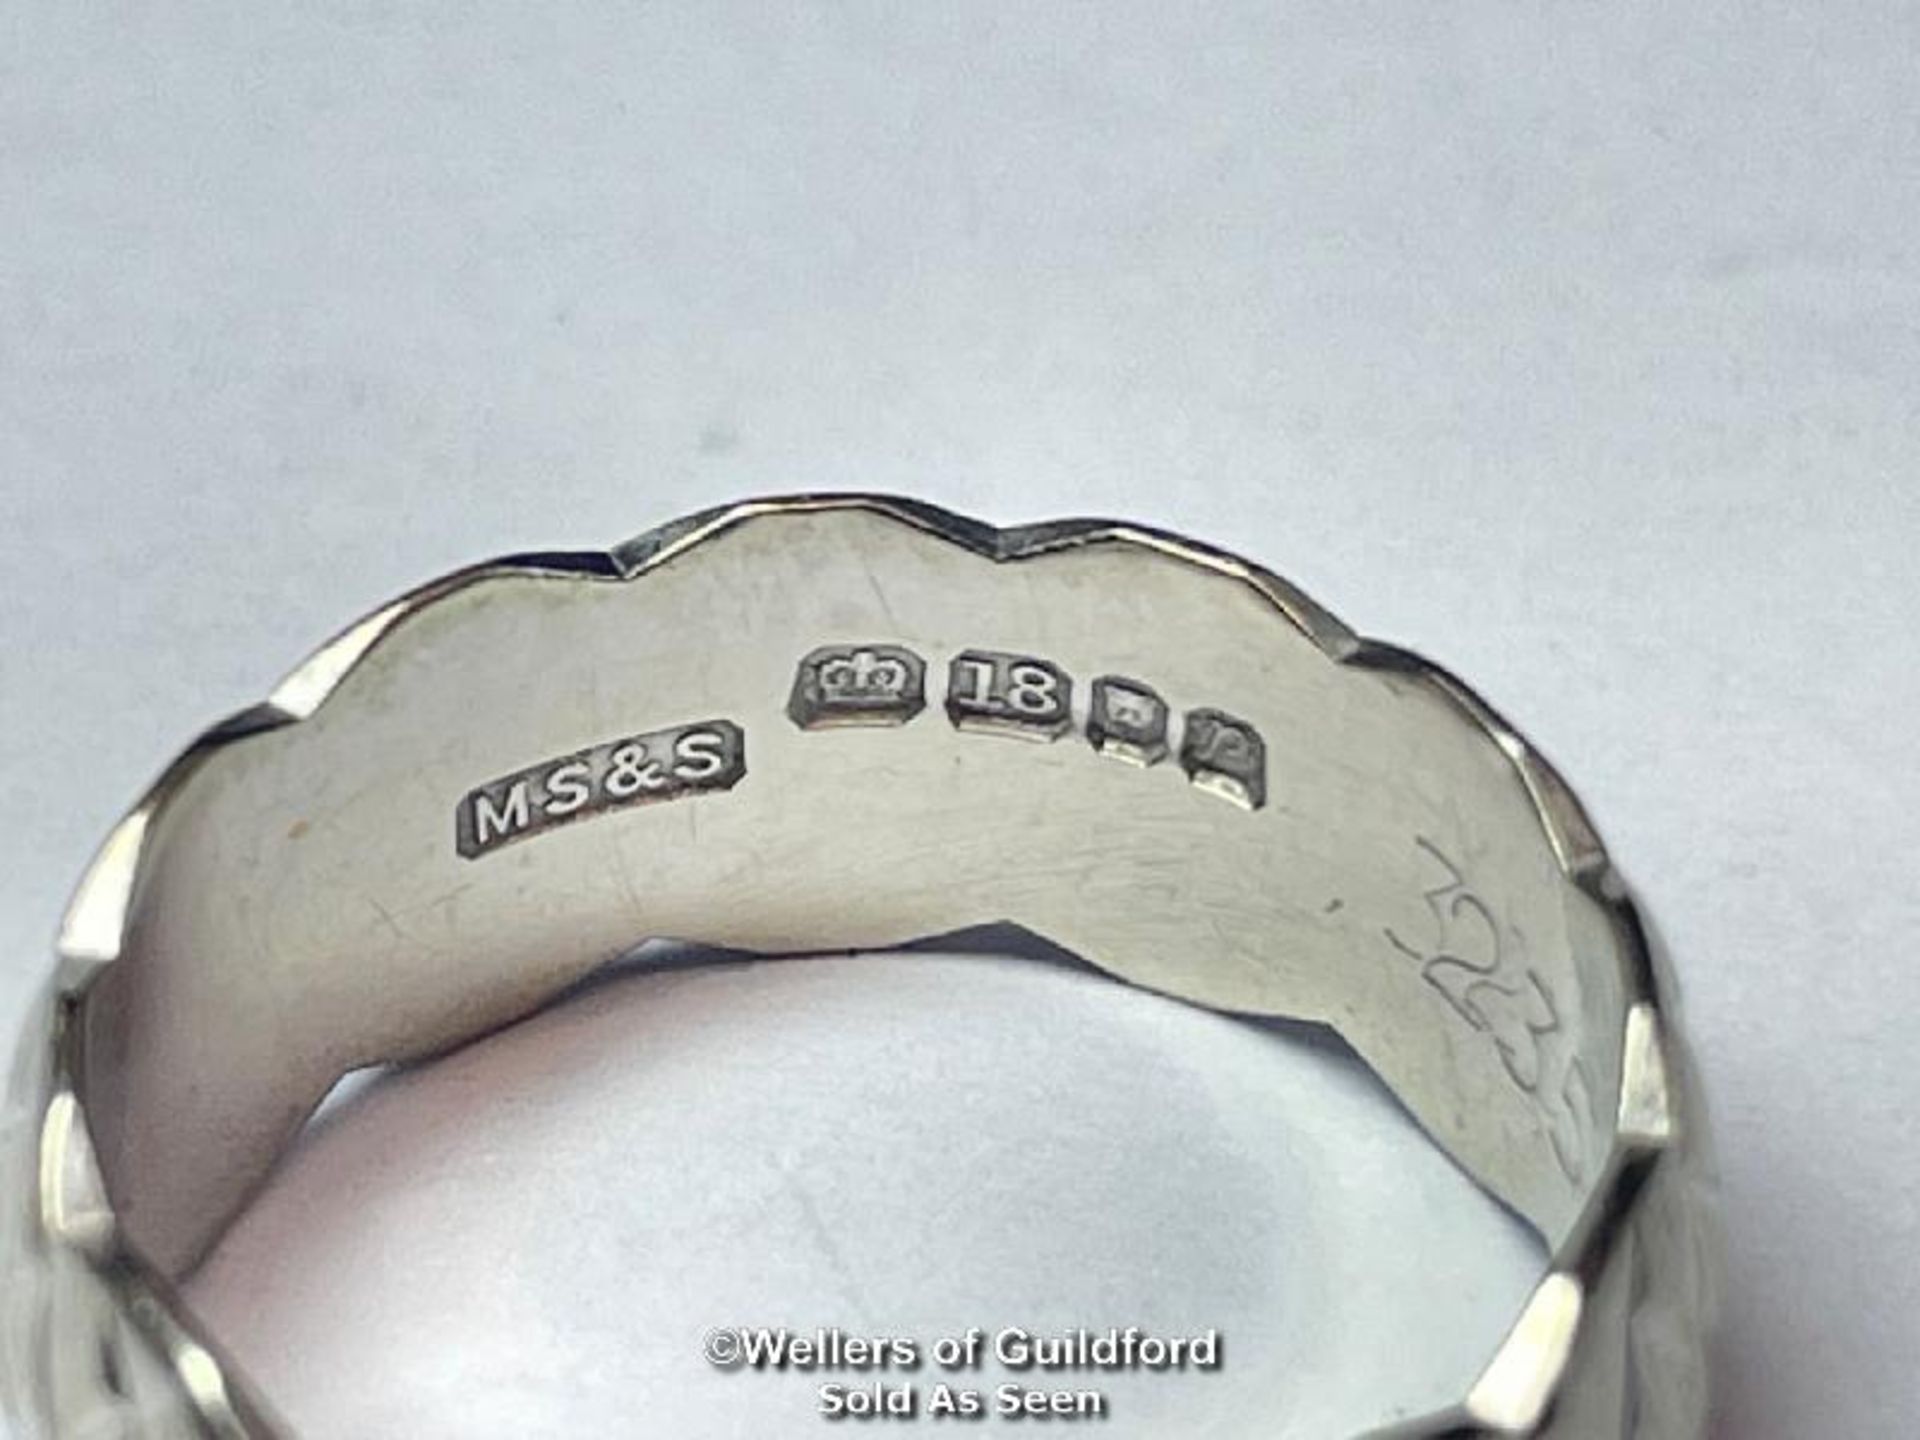 18CT WHITE GOLD PATTERNED WEDDING RING, HALLMARKED LONDON 1970, WEIGHT 4.7G, RING SIZE J - Image 3 of 4